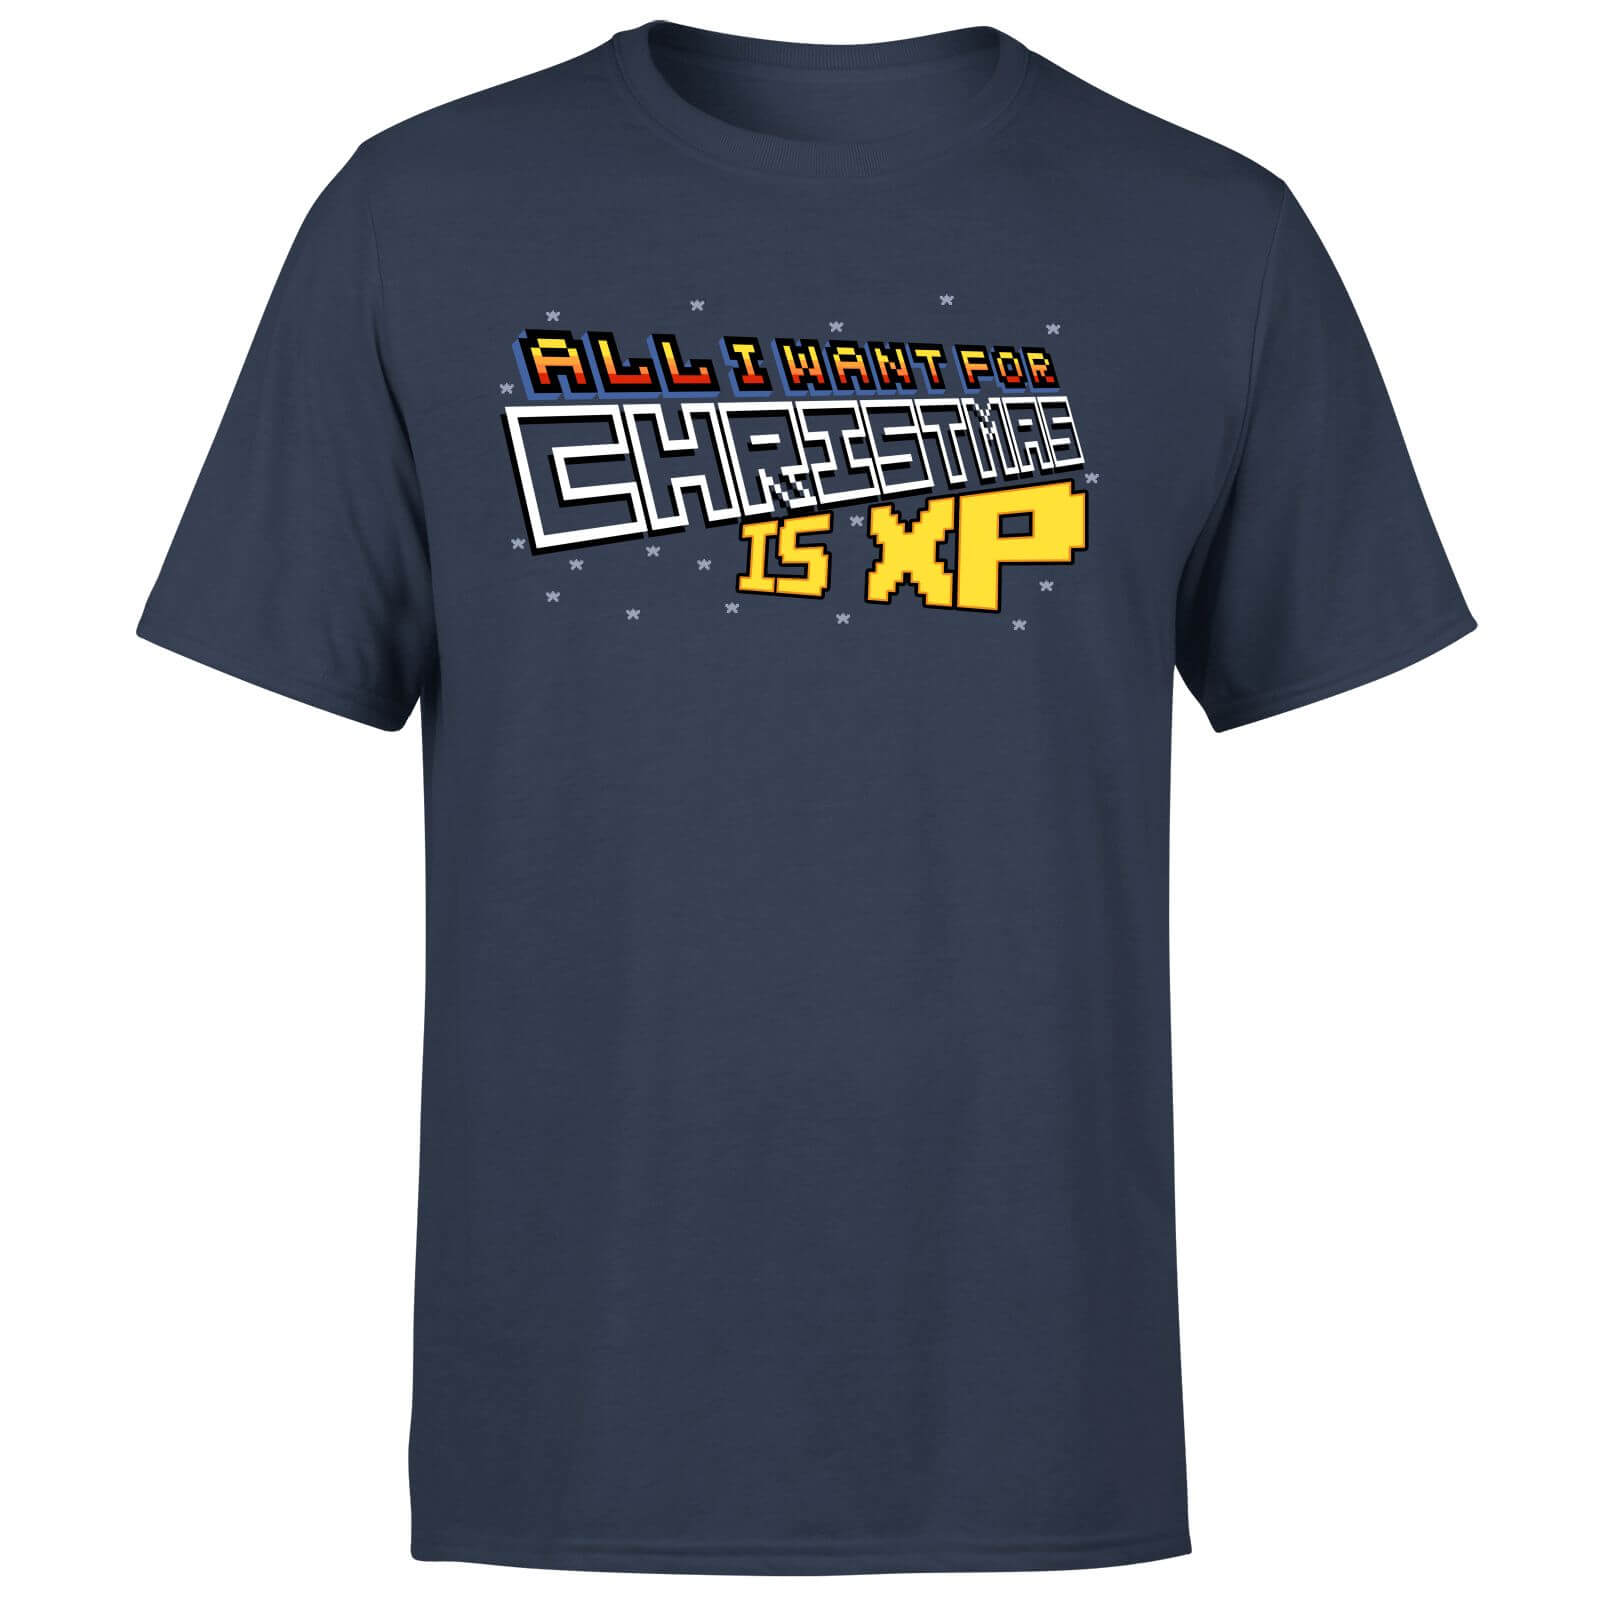 All I Want For Xmas Is XP T-Shirt - Navy - M - Navy